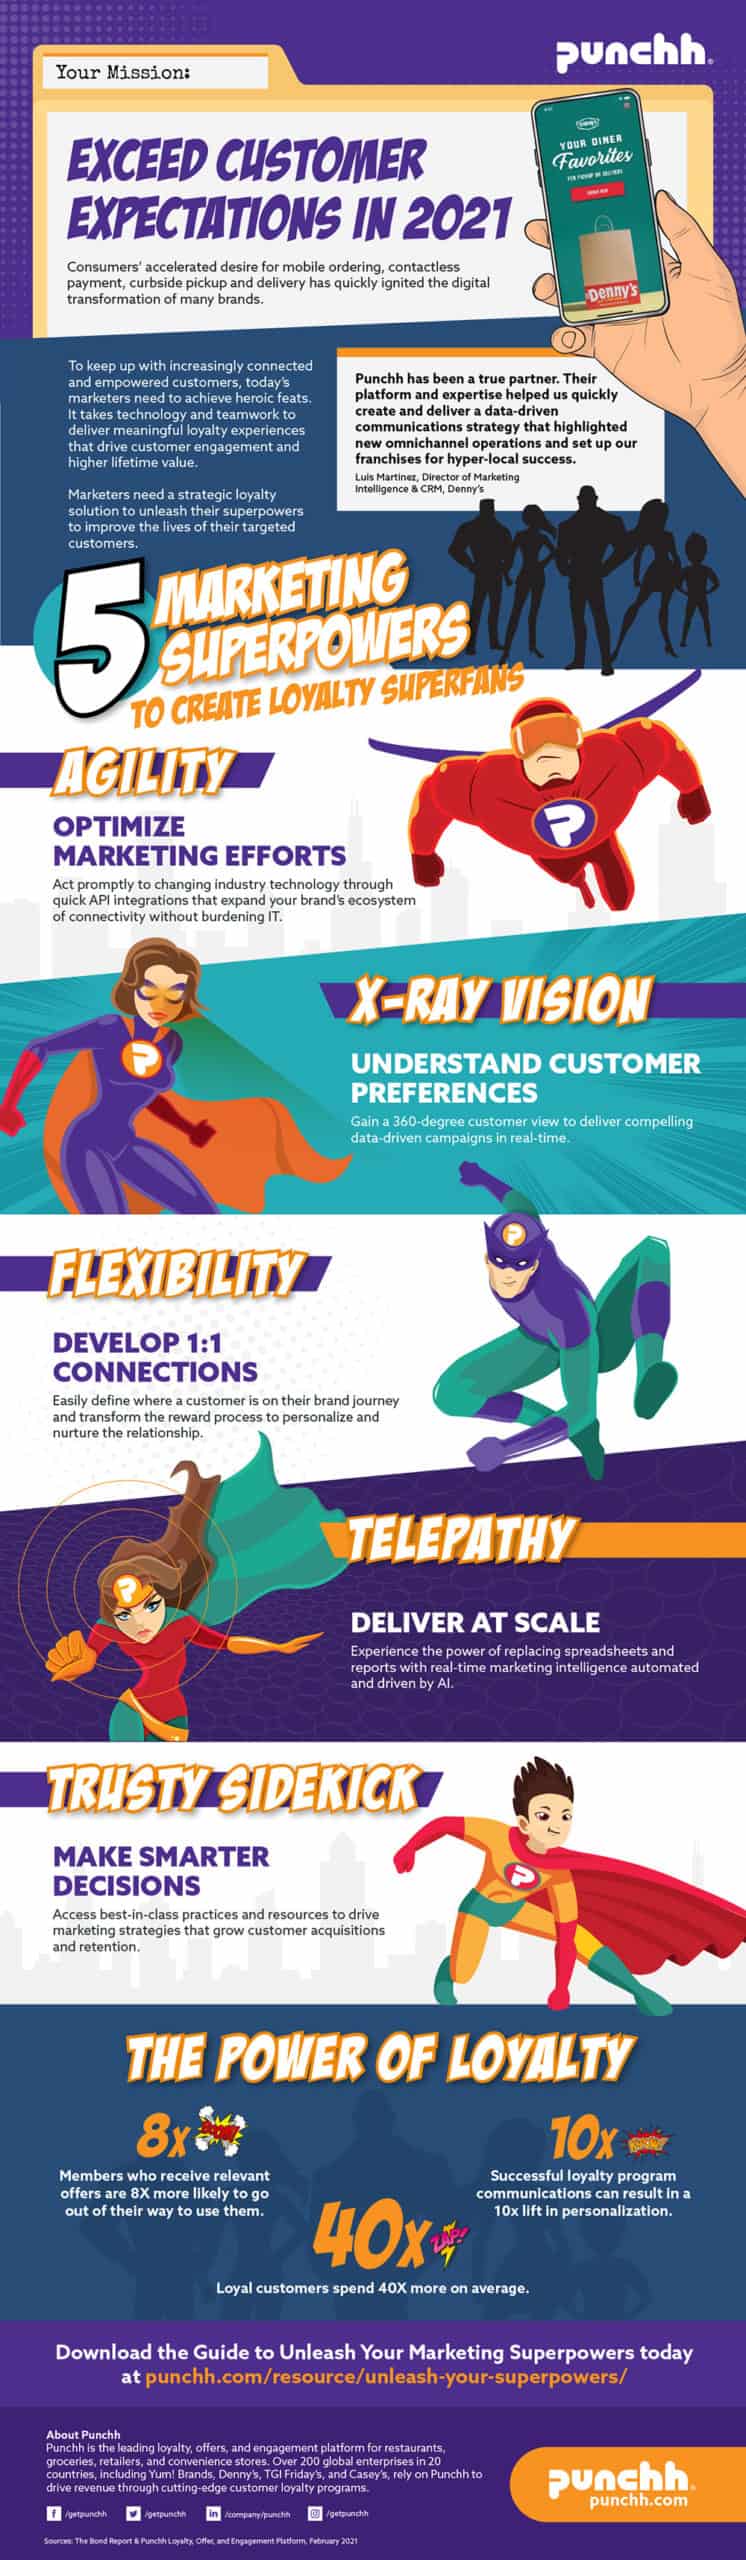 5 Marketing Superpowers to Create Loyalty Superfans